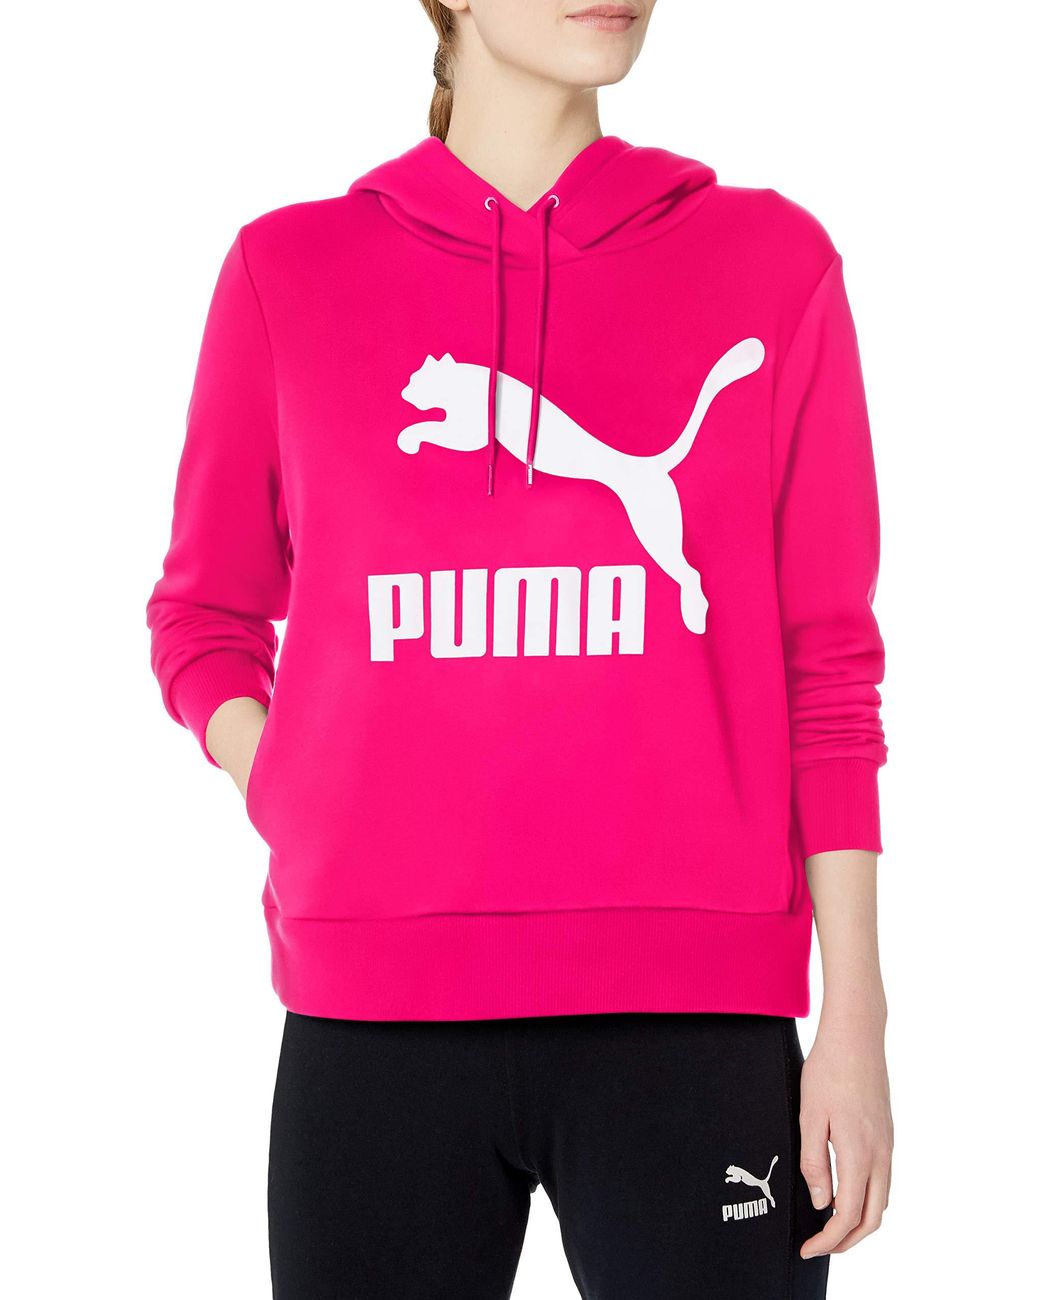 PUMA Rubber Hooded Sweatshirt in Bright Rose (Pink) - Save 56% - Lyst